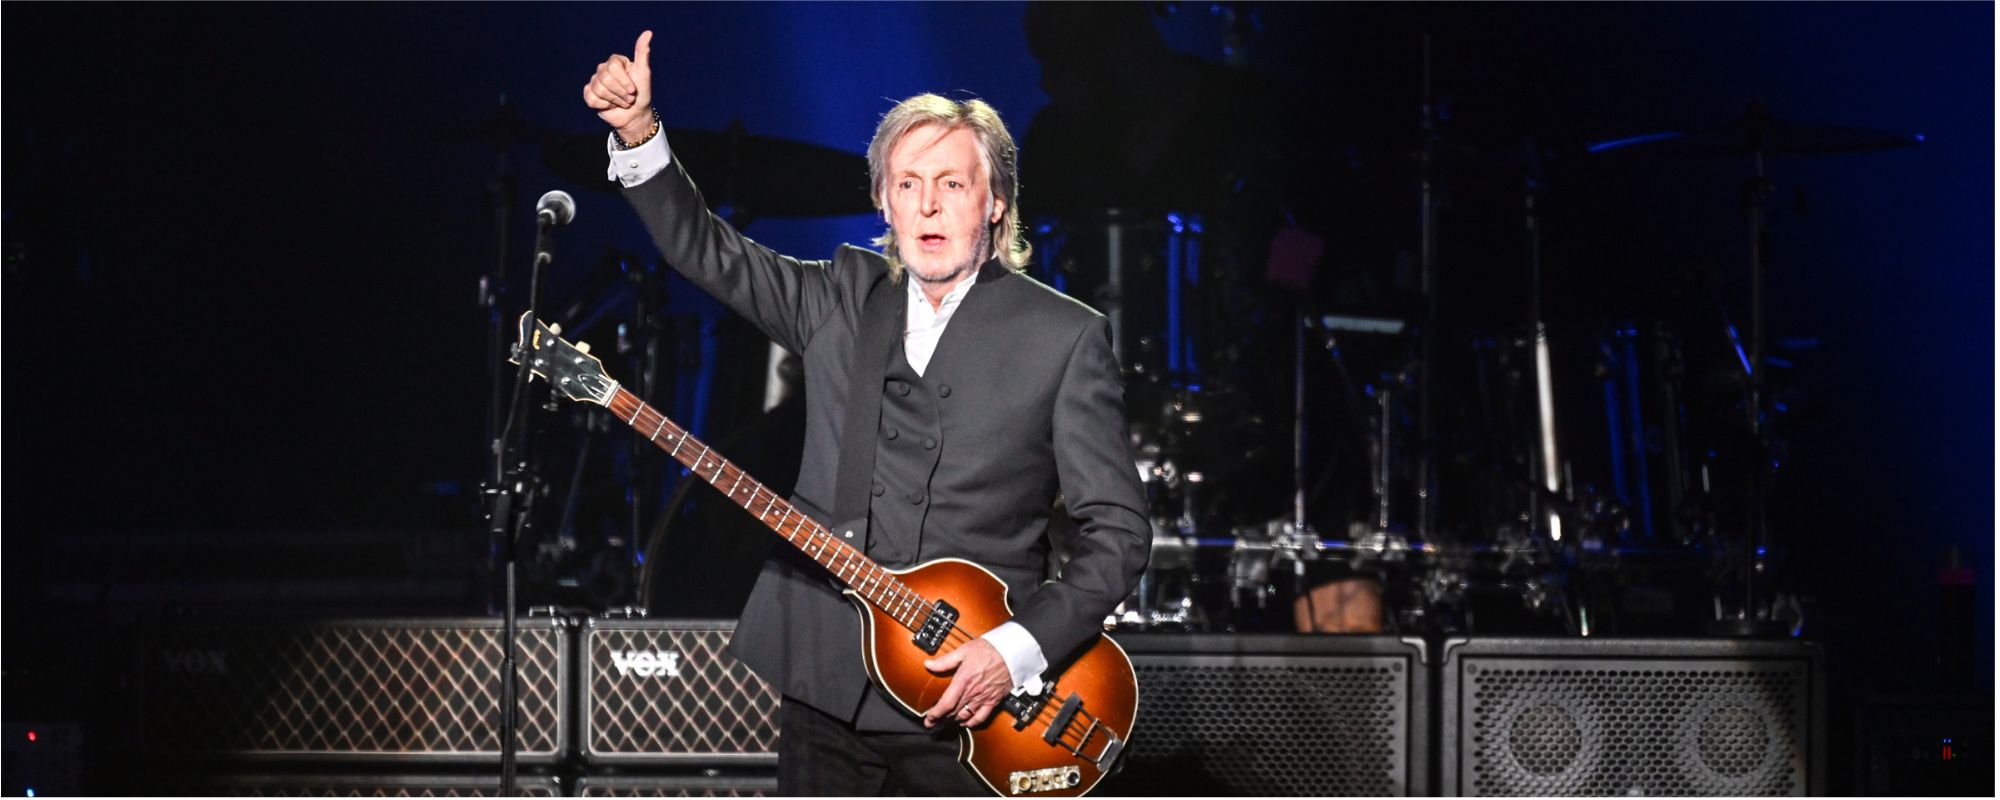 5 Little-Known Facts About Paul McCartney